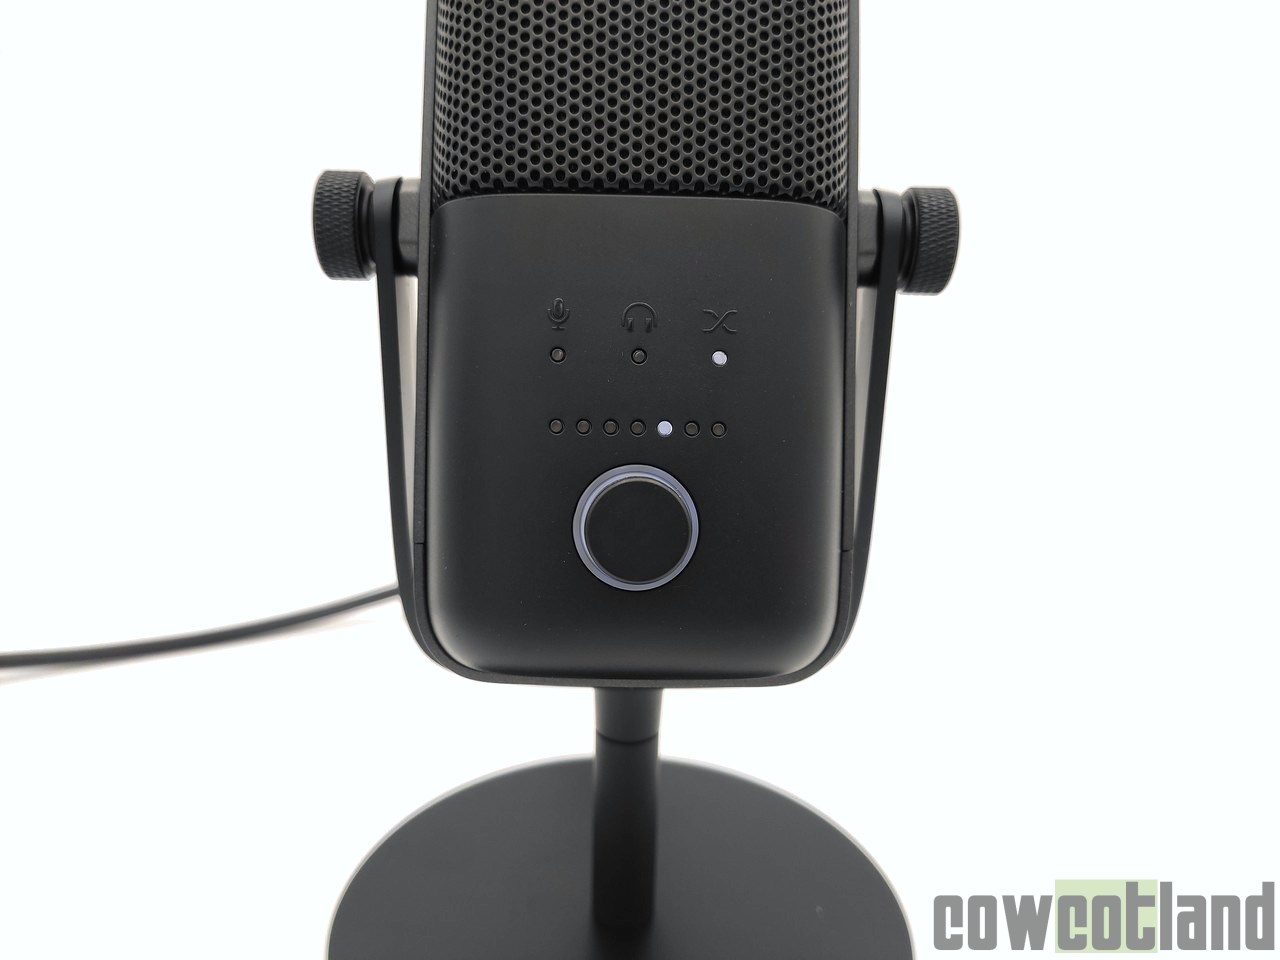 Image 44874, galerie Test Elgato Wave:3, un microphone cardiode USB taill pour le streaming